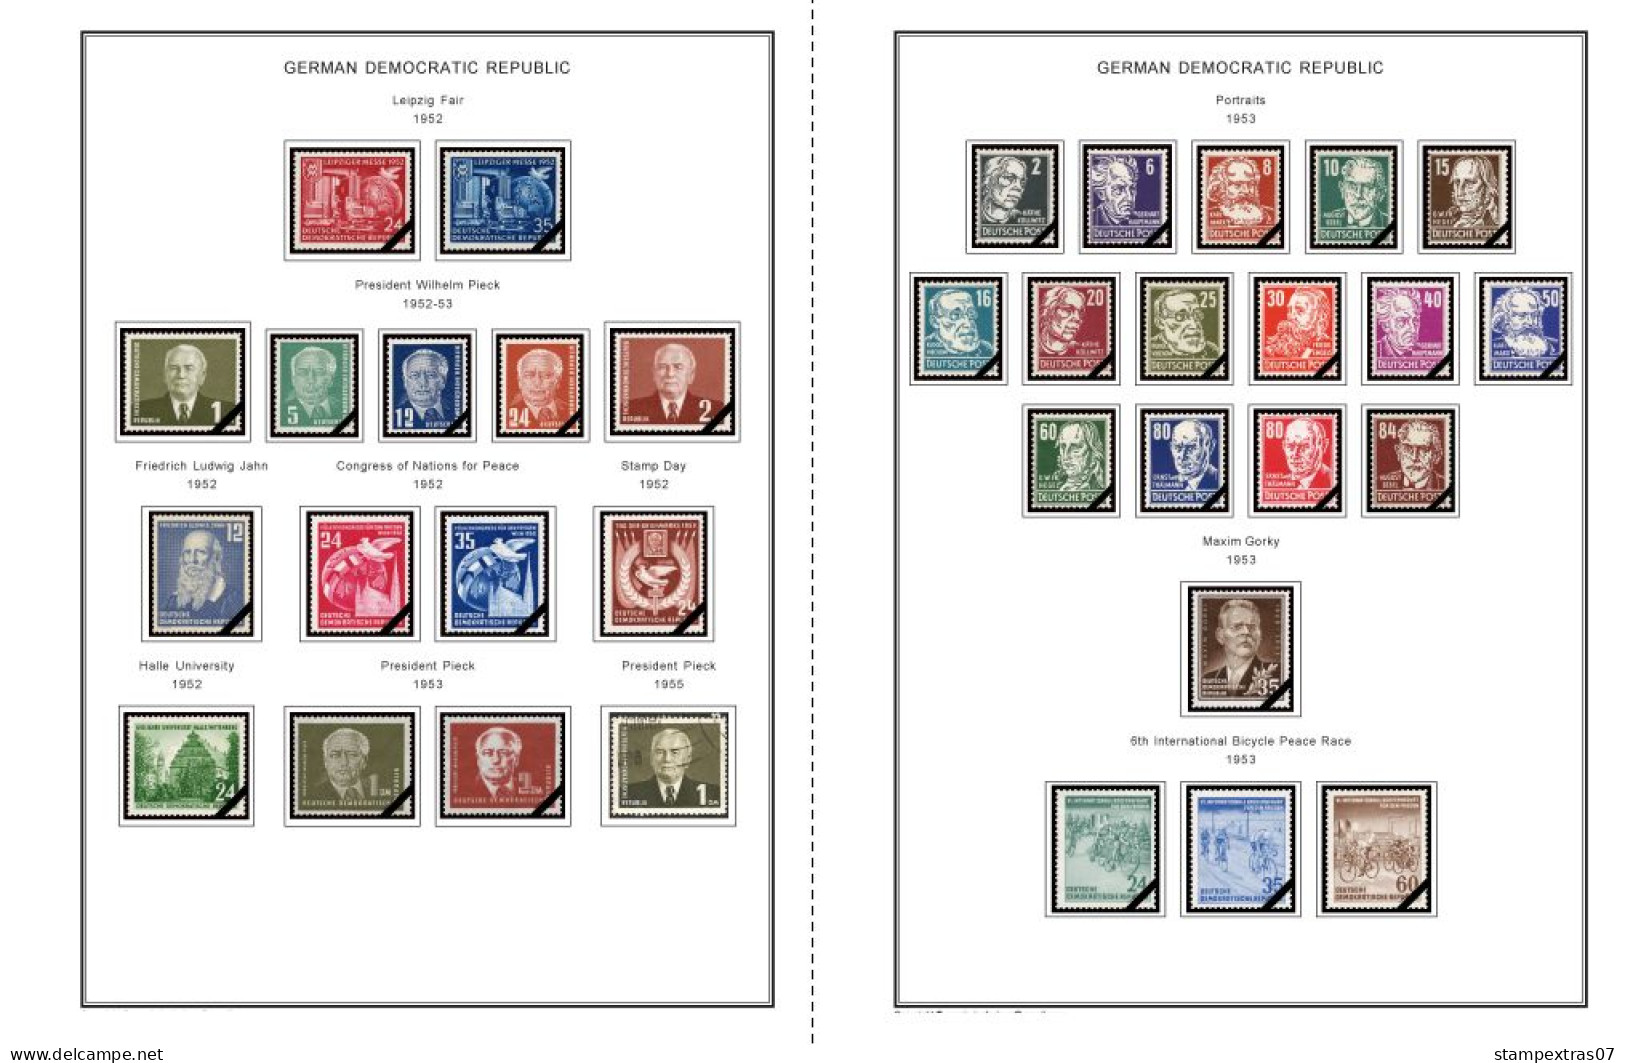 GERMANY (EAST - DDR) STAMP ALBUM PAGES 1949-1990 (334 Color Illustrated Pages) - Engels